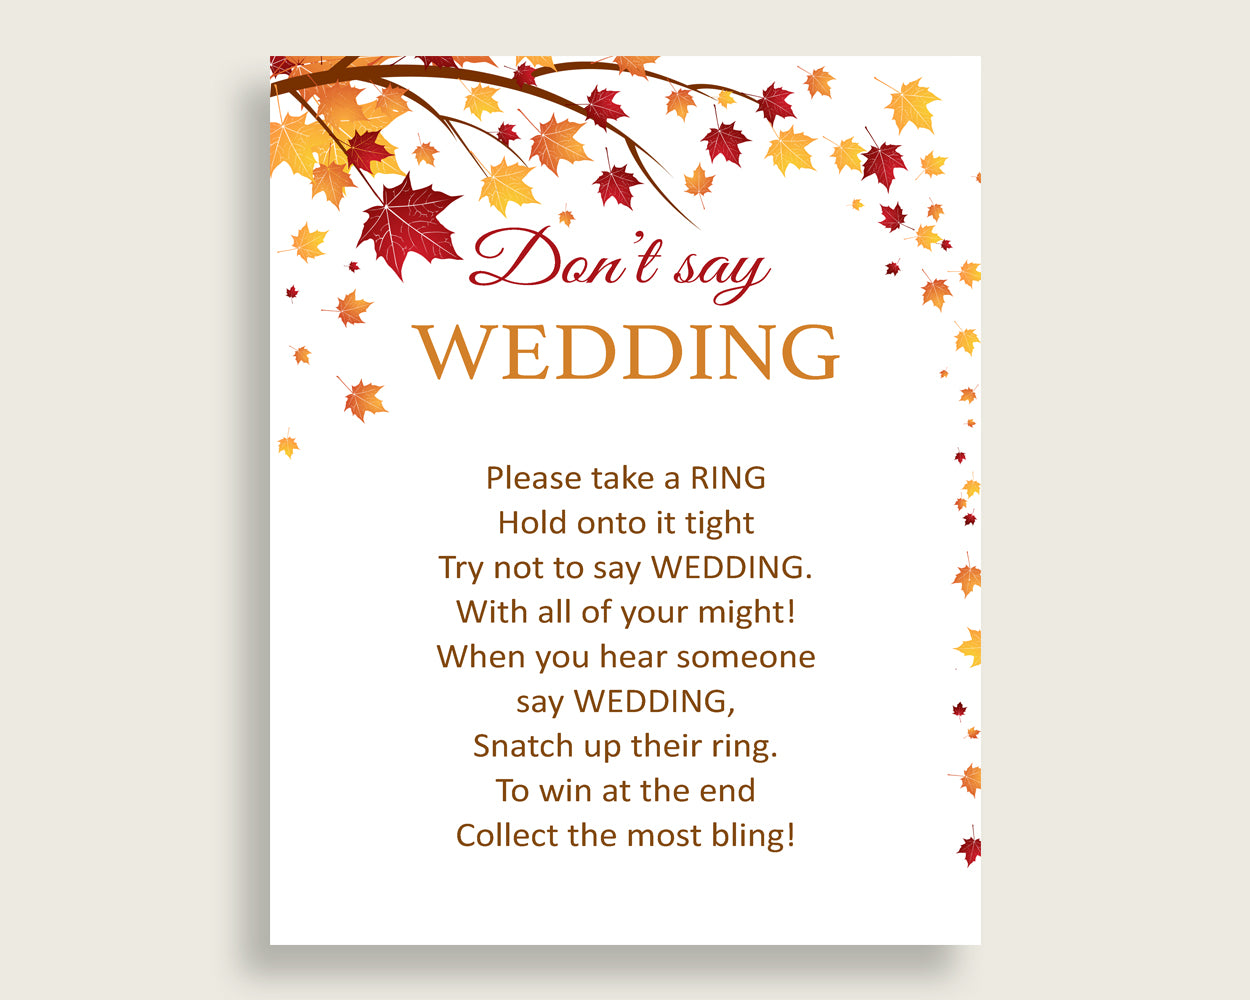 Don't Say Wedding Game Bridal Shower Don't Say Wedding Game Fall Bridal Shower Don't Say Wedding Game Bridal Shower Autumn Don't Say YCZ2S